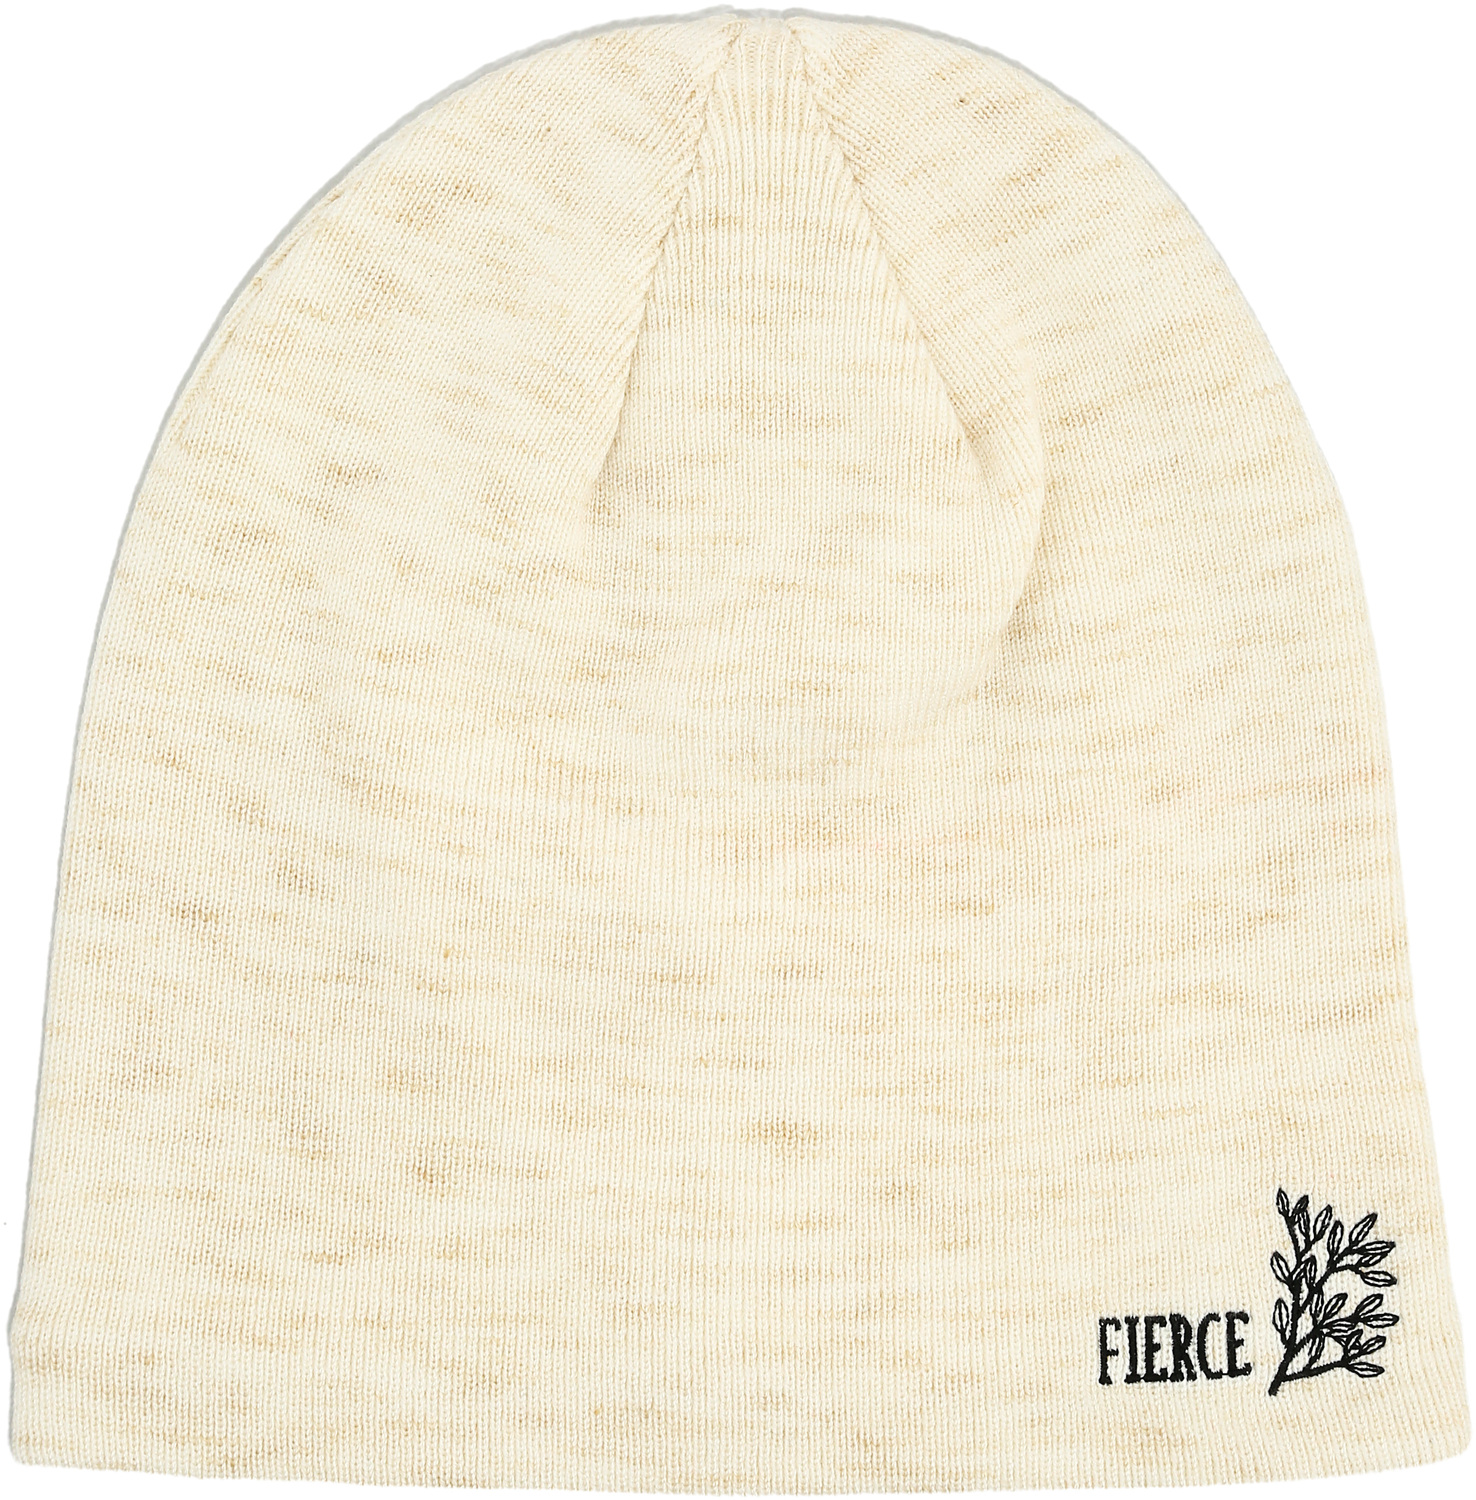 Fierce by Faith Hope and Healing - Fierce - Women's Soft Cotton Lined Knitted Beanie